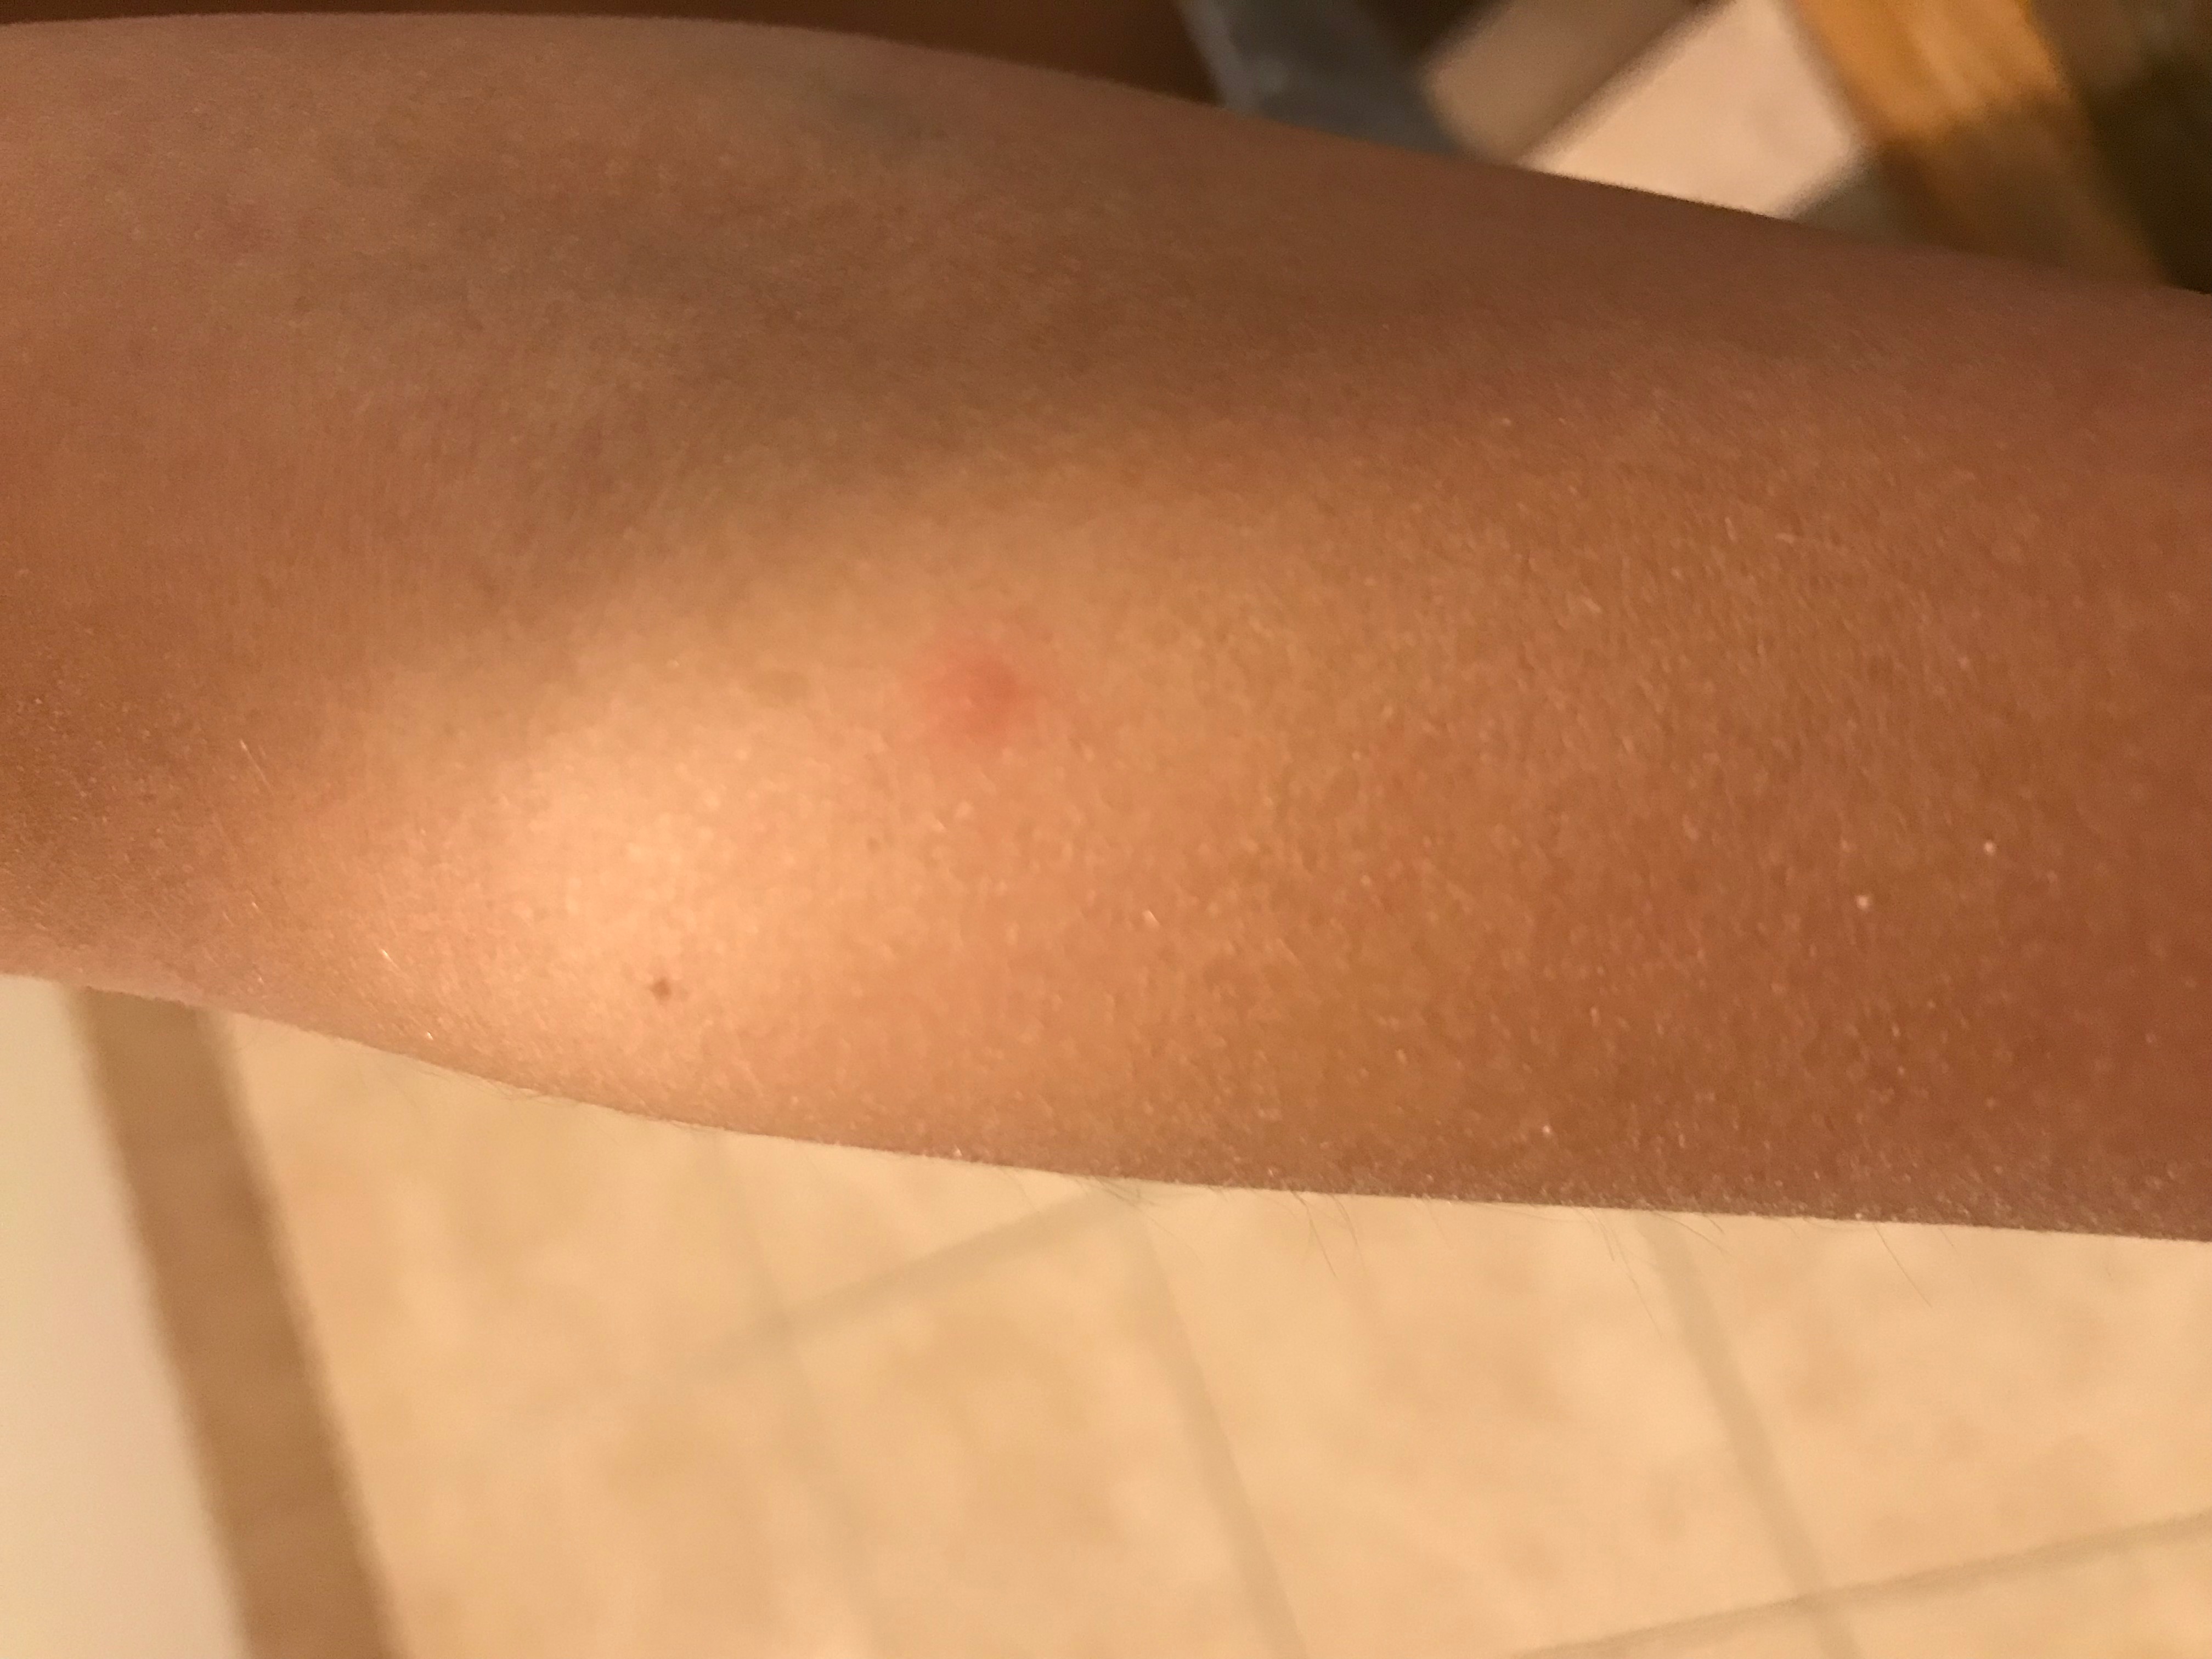 Bug bite on arm from BW hotel